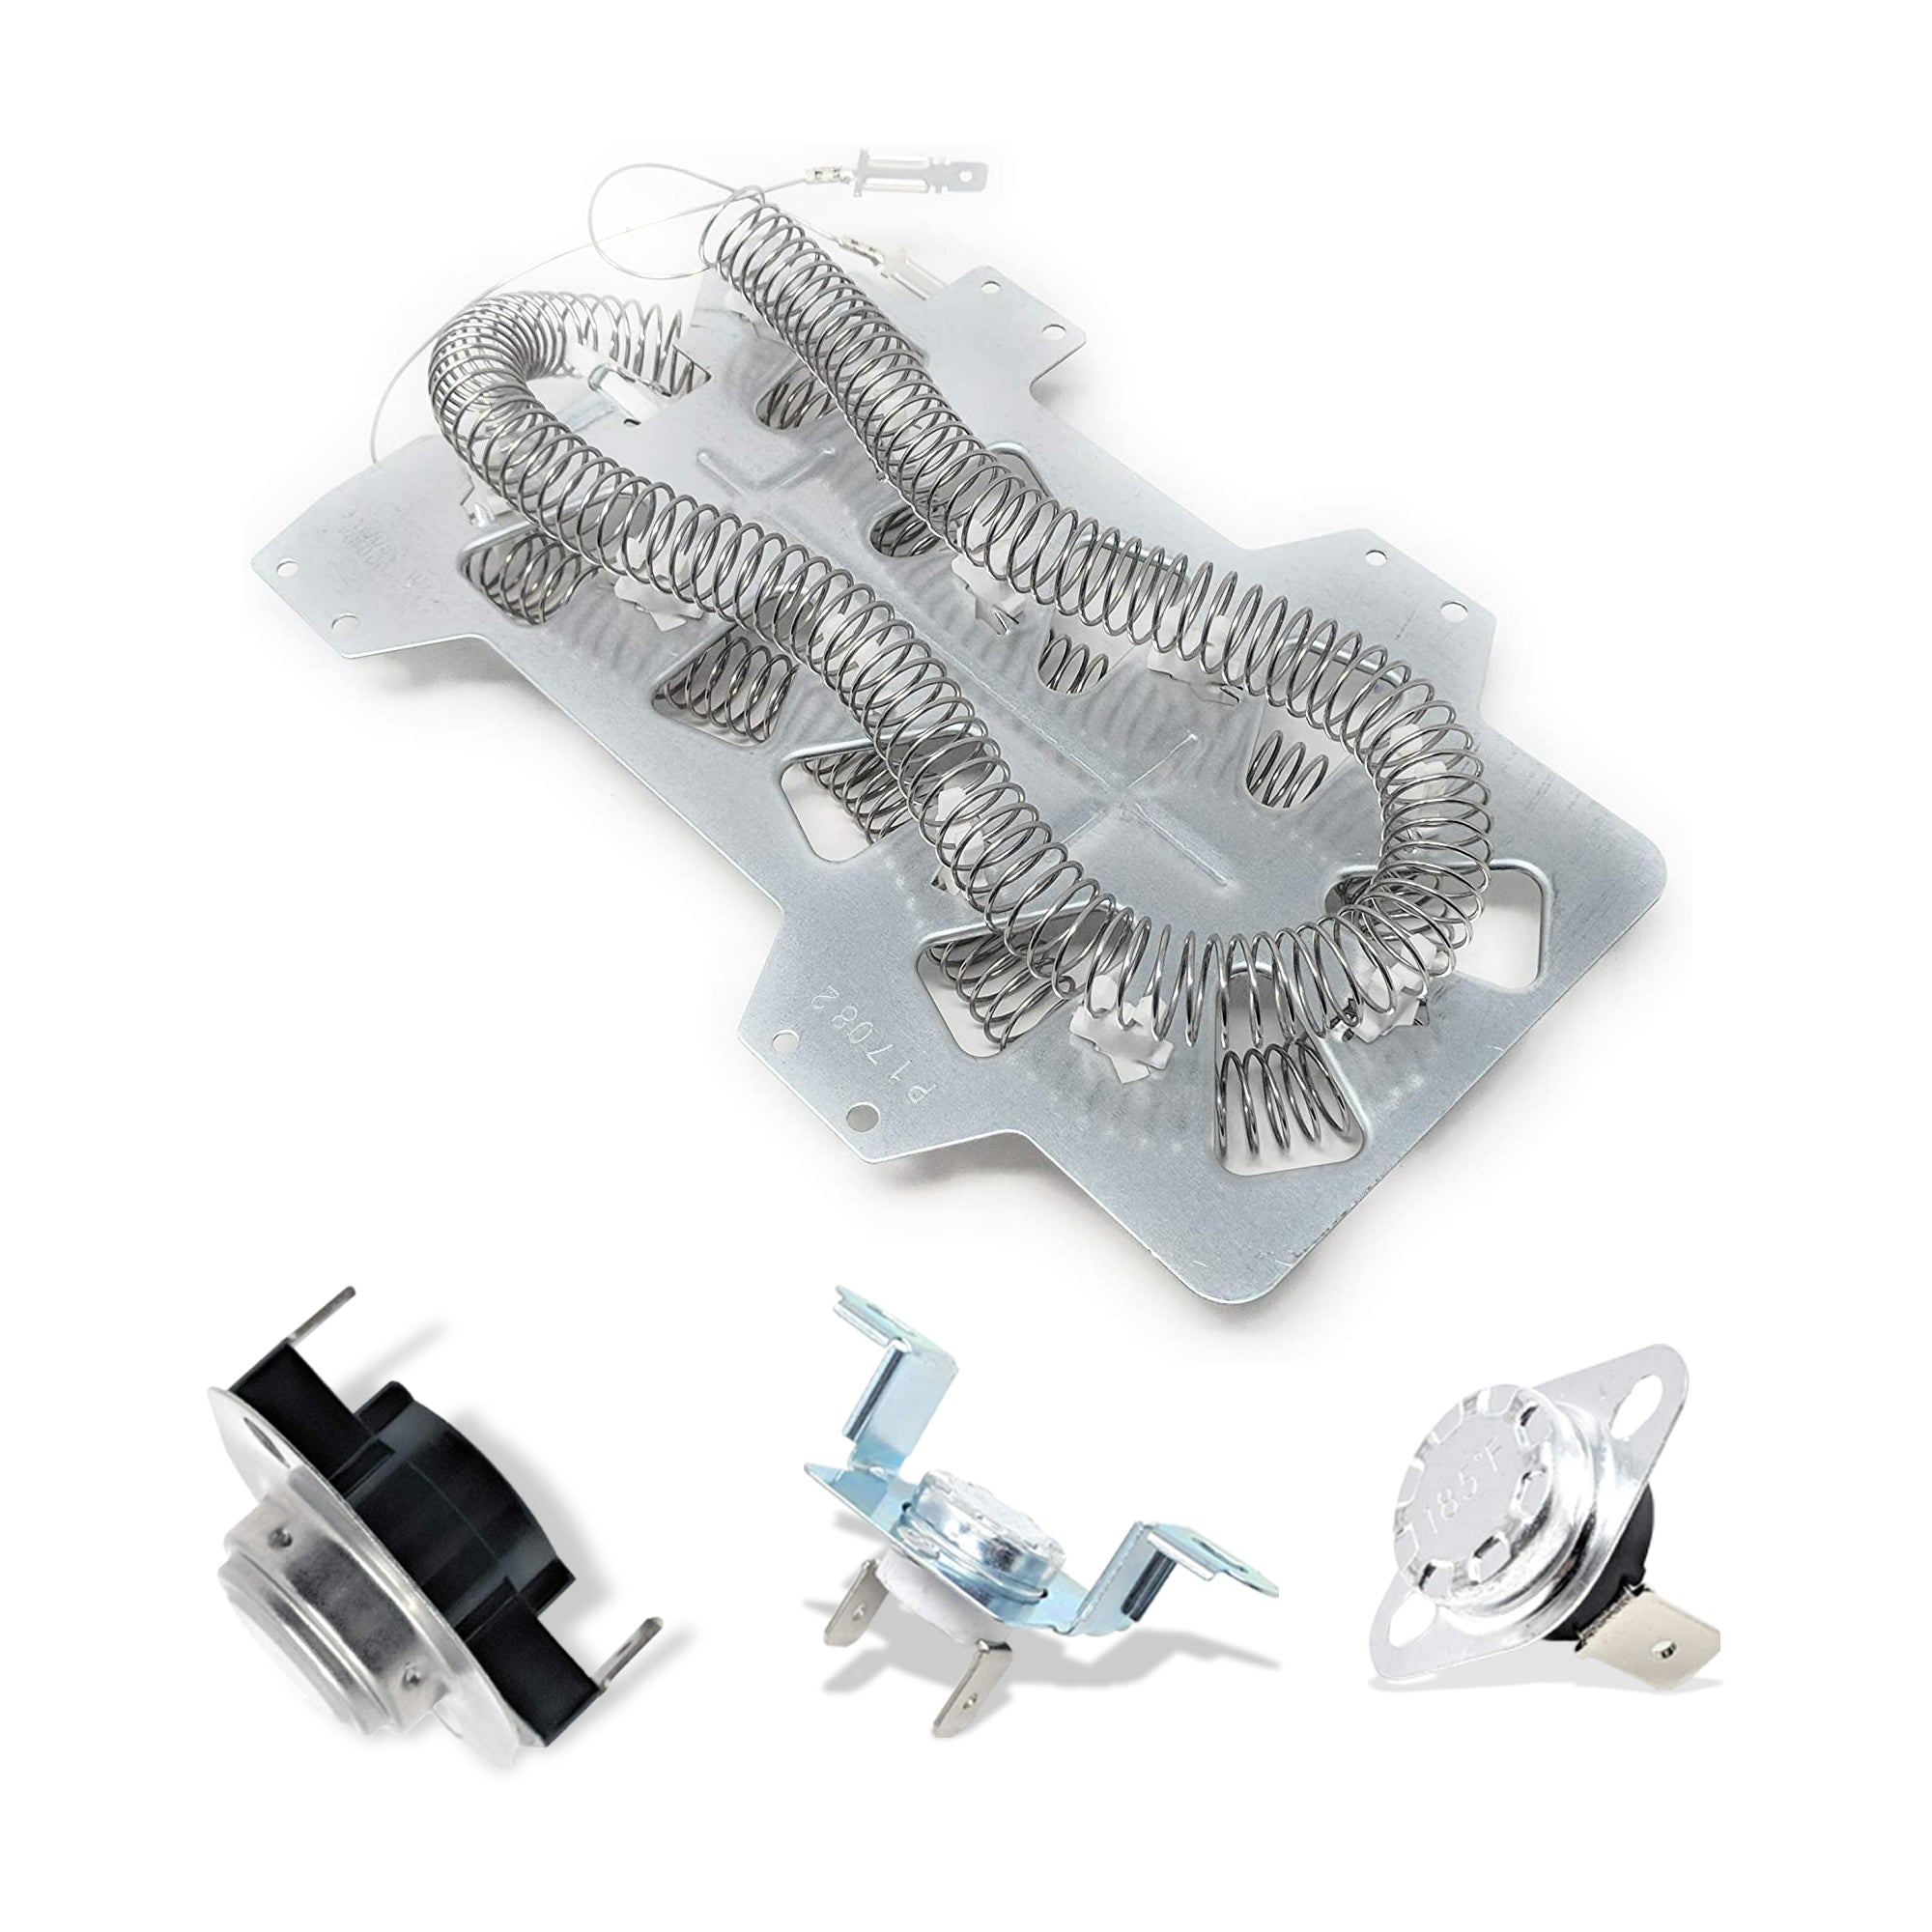 Samsung Dryer Heating Element Kit - Thermal Fuse & Thermostat Replacement - Appliance Pros